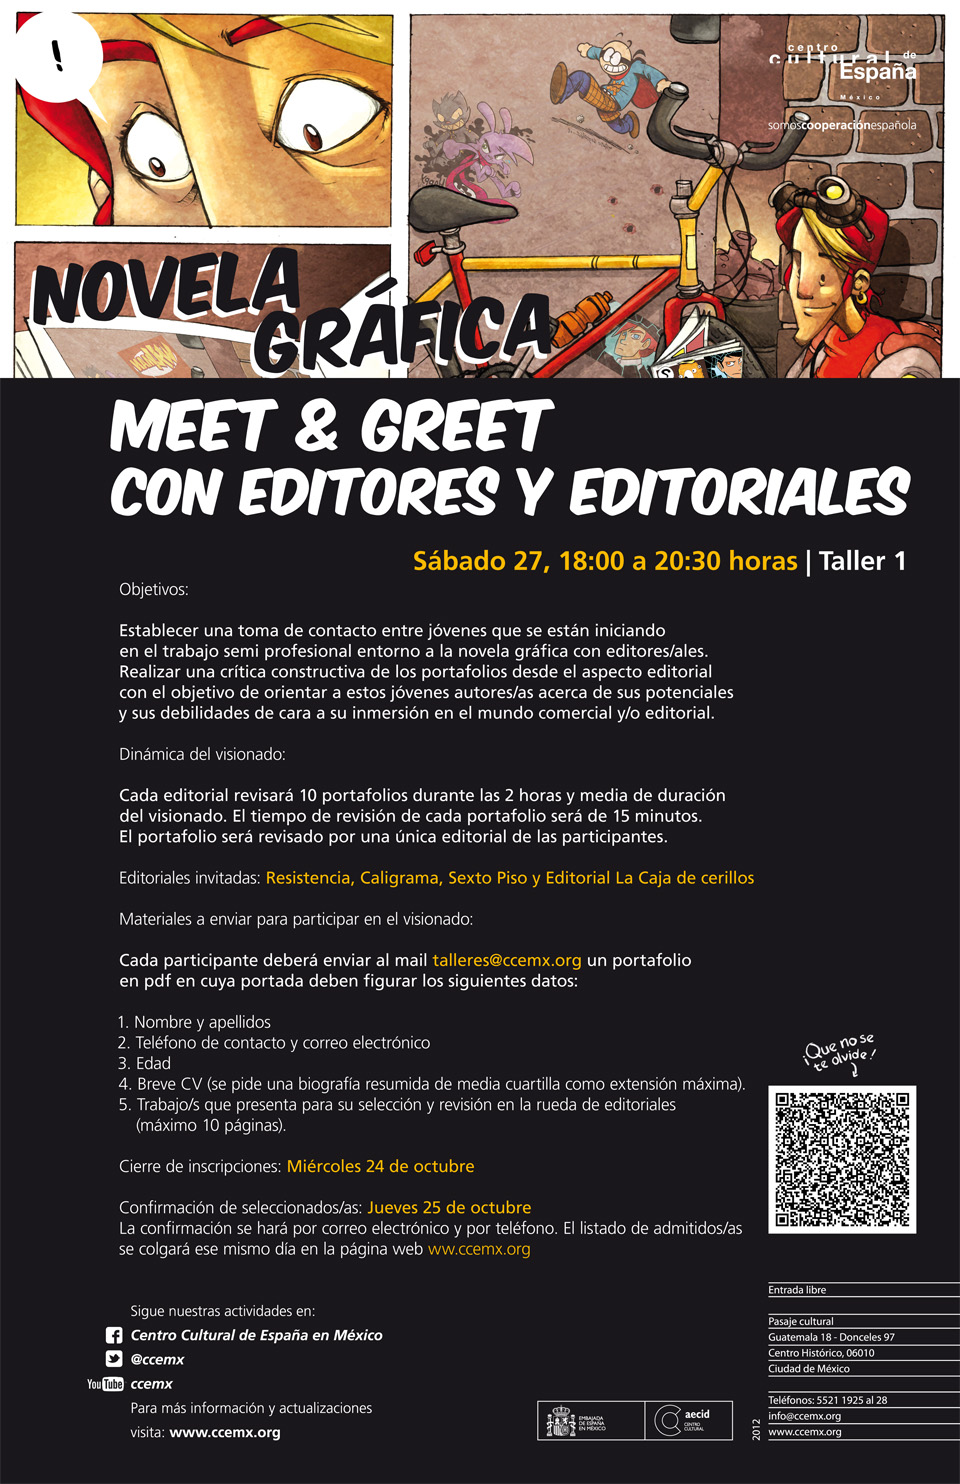 Meet and Greet con Editoriales!